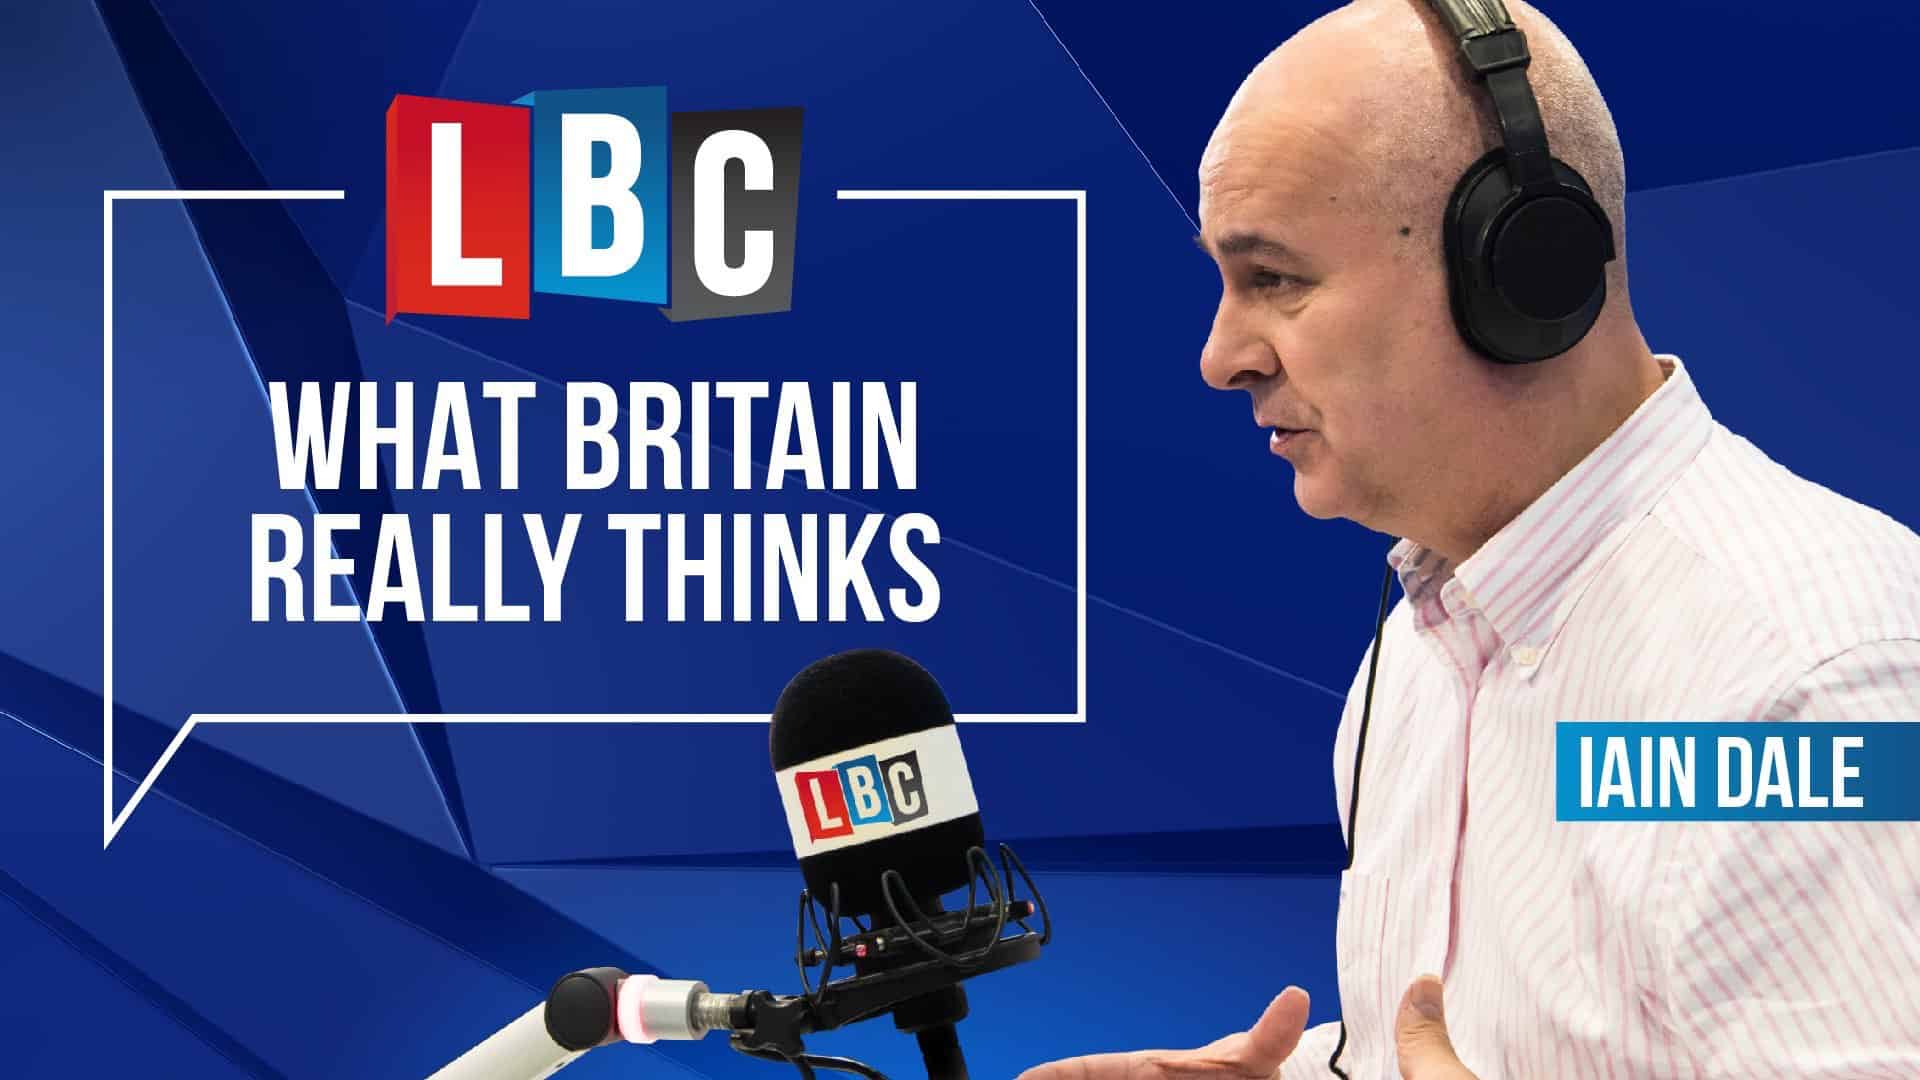 Featured image for “Iain Dale on his new book: The Prime Ministers”